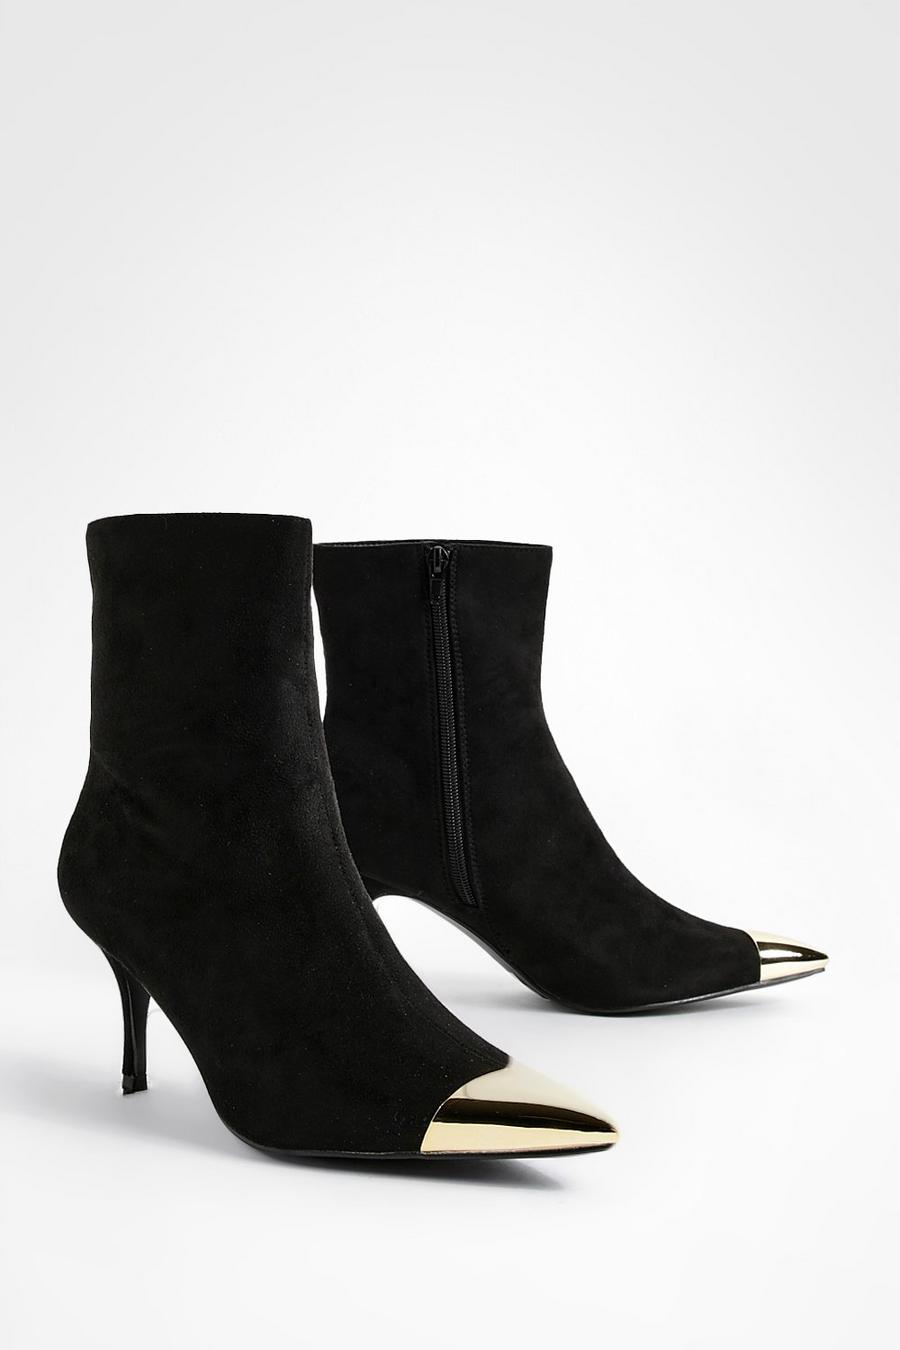 Black Metal Toe Cap Low Stiletto Pointed Toe Ankle Boots 